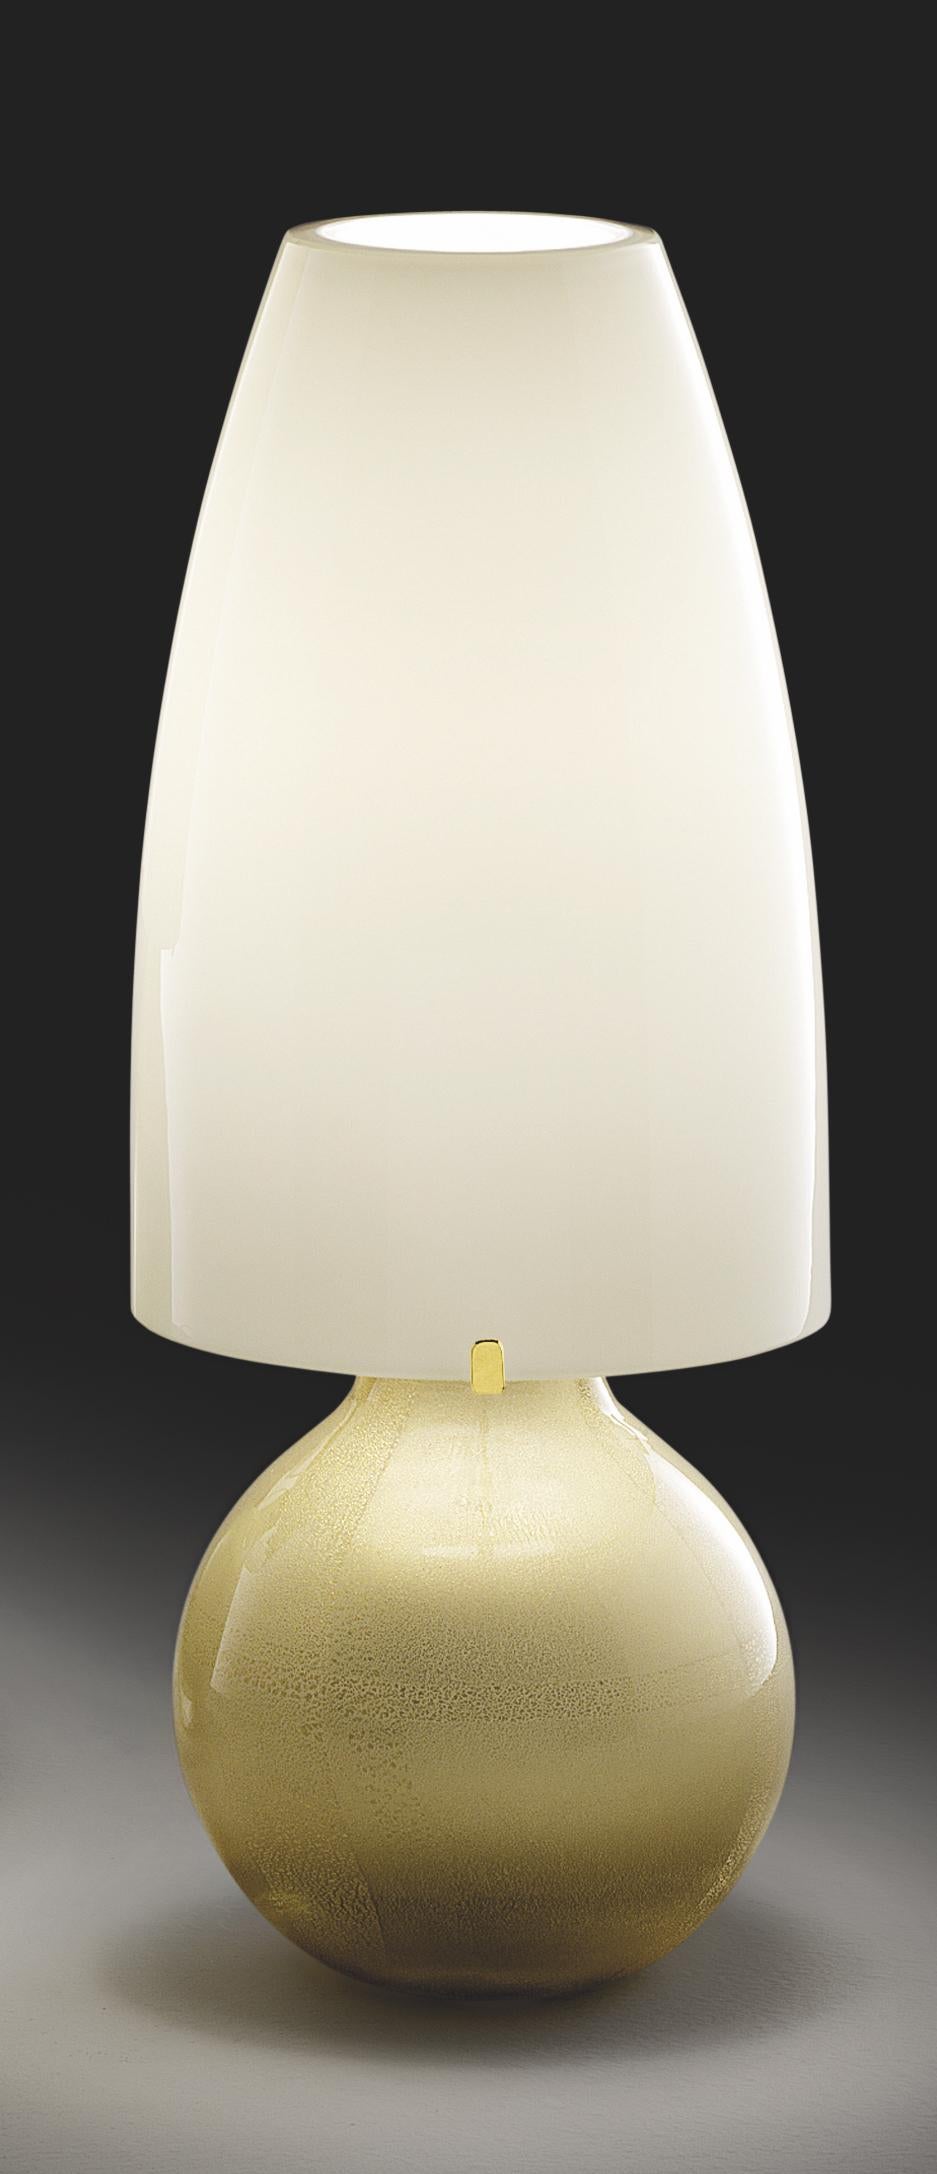 Table lamp in handblown glass with submerged gold leaves and gold plated metal finishes. Beautiful atop any table, desk or credenza. Also available in various sizes and colors.

Light source: One max 100 W E27. Dimensions: 15.5 cm diameter x 37 cm